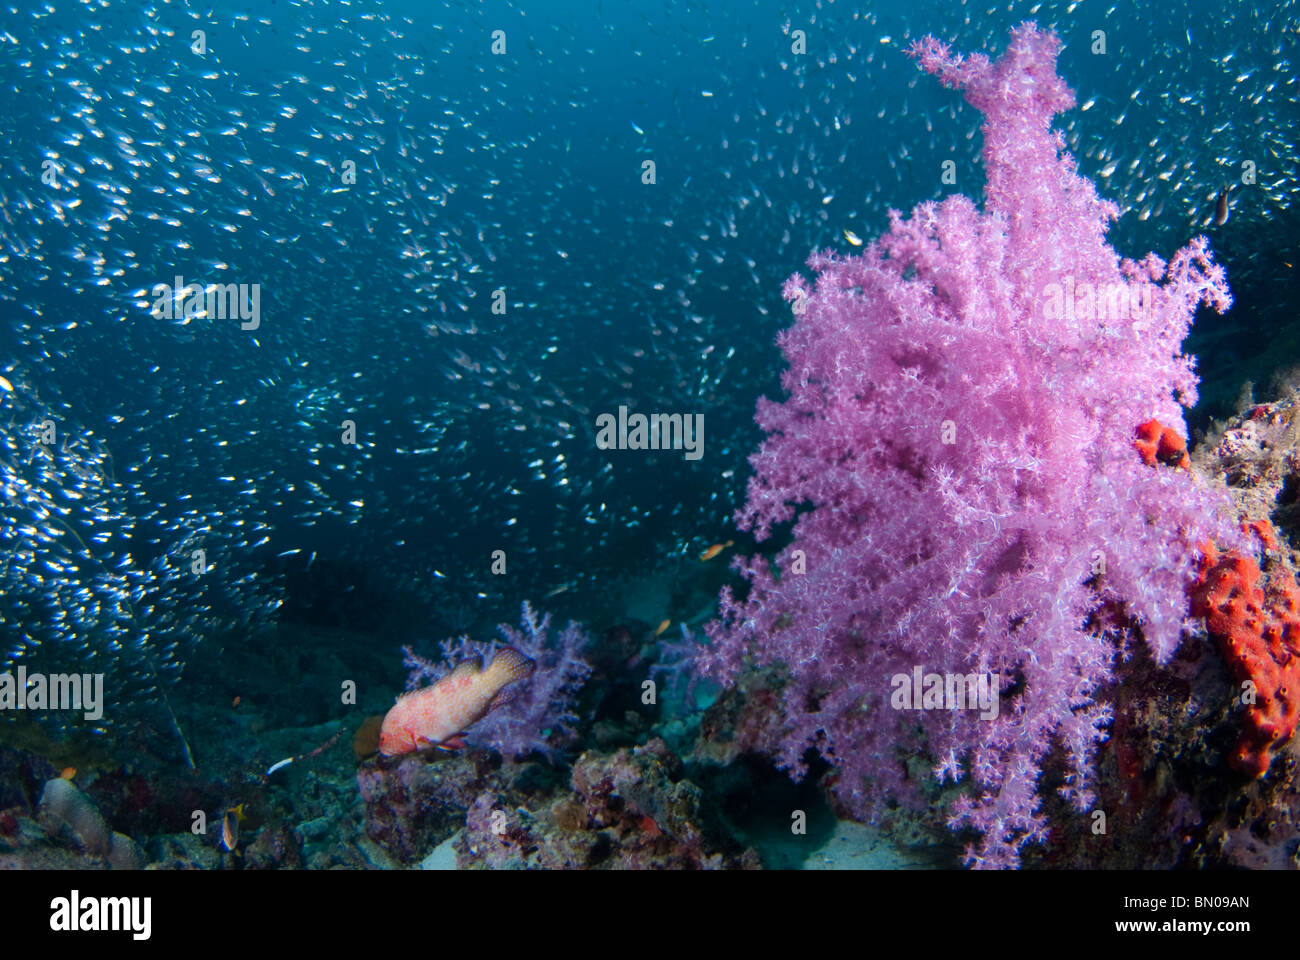 Soft Coral, Dendronephthya sp., and school of small silvery fishes, Similan Islands Stock Photo